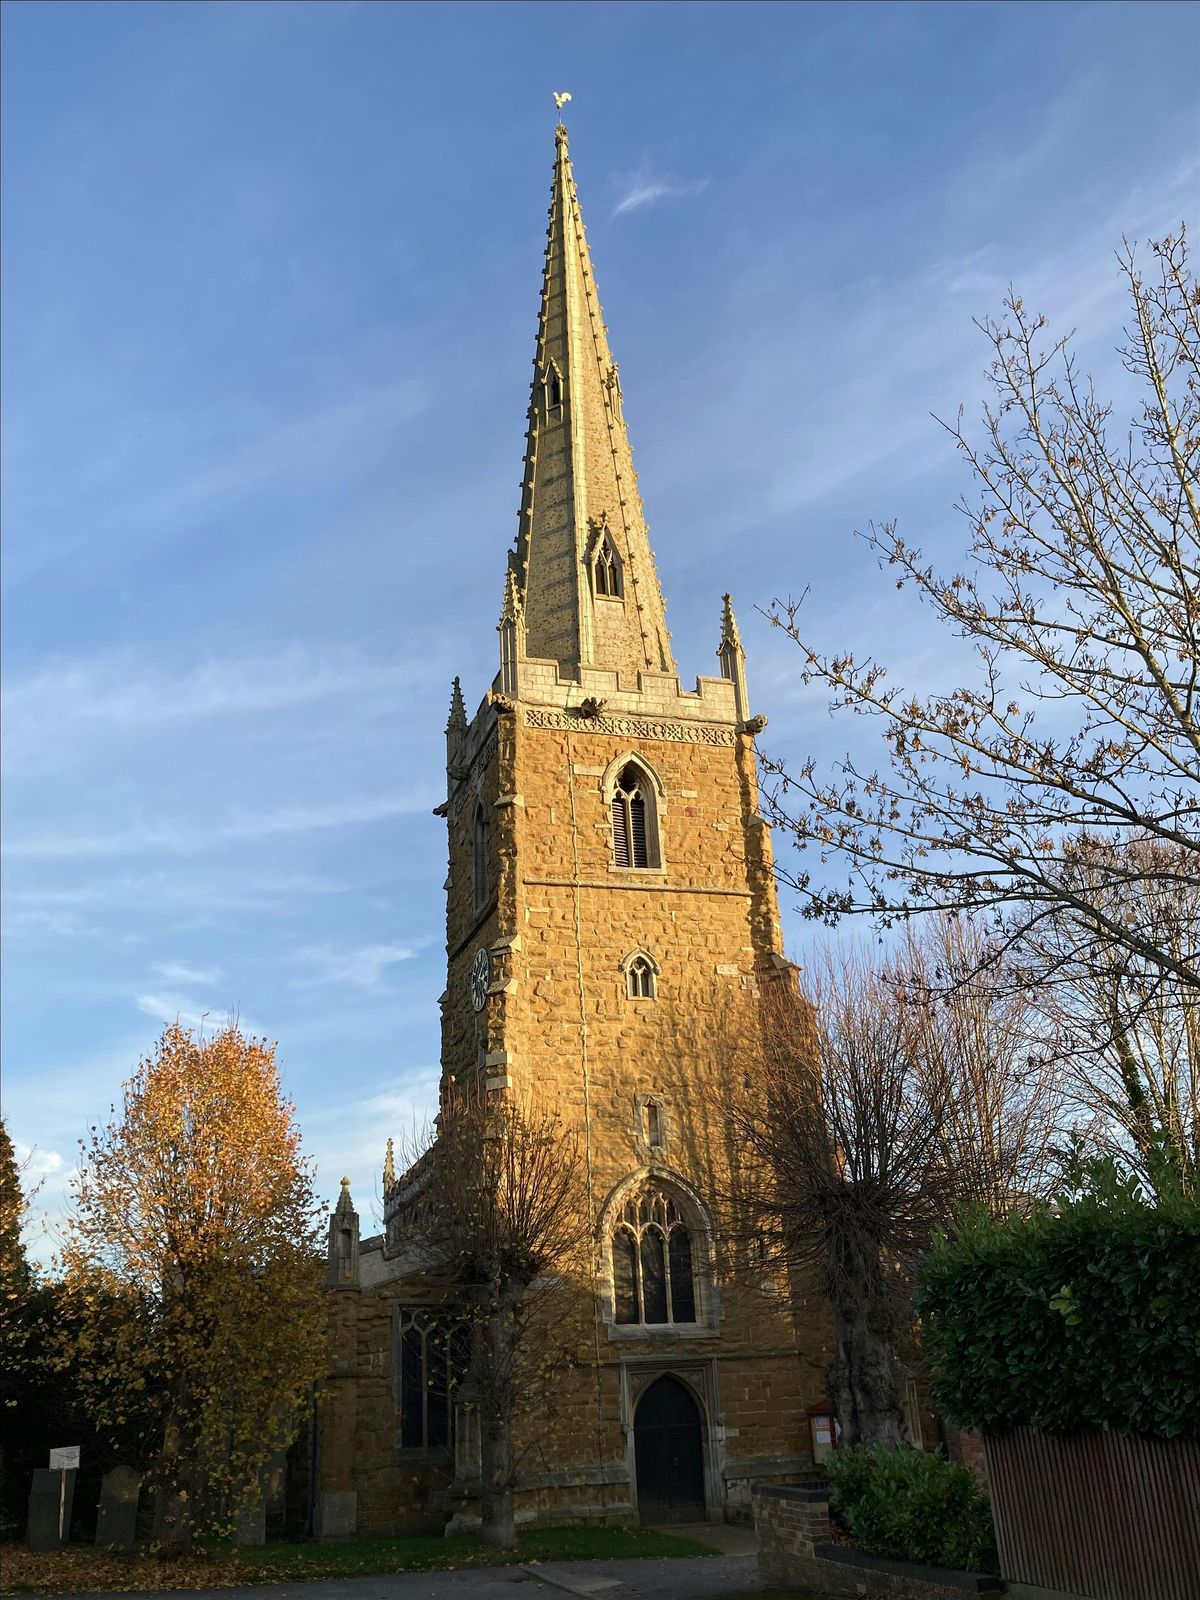 Being Human. Leicestershire Landmarks - Church Spires and their Builders